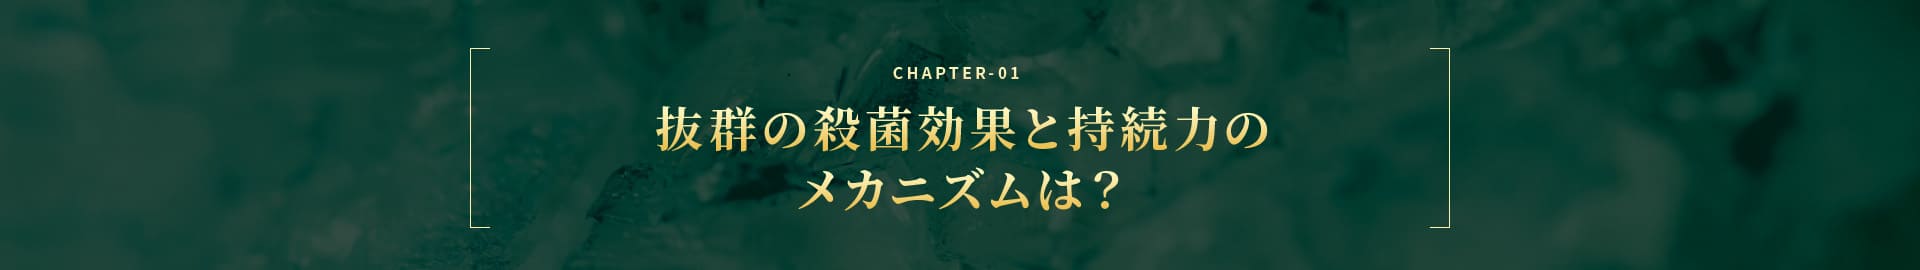 CHAPTER-01 抜群の殺菌効果と持続力のメカニズムは？